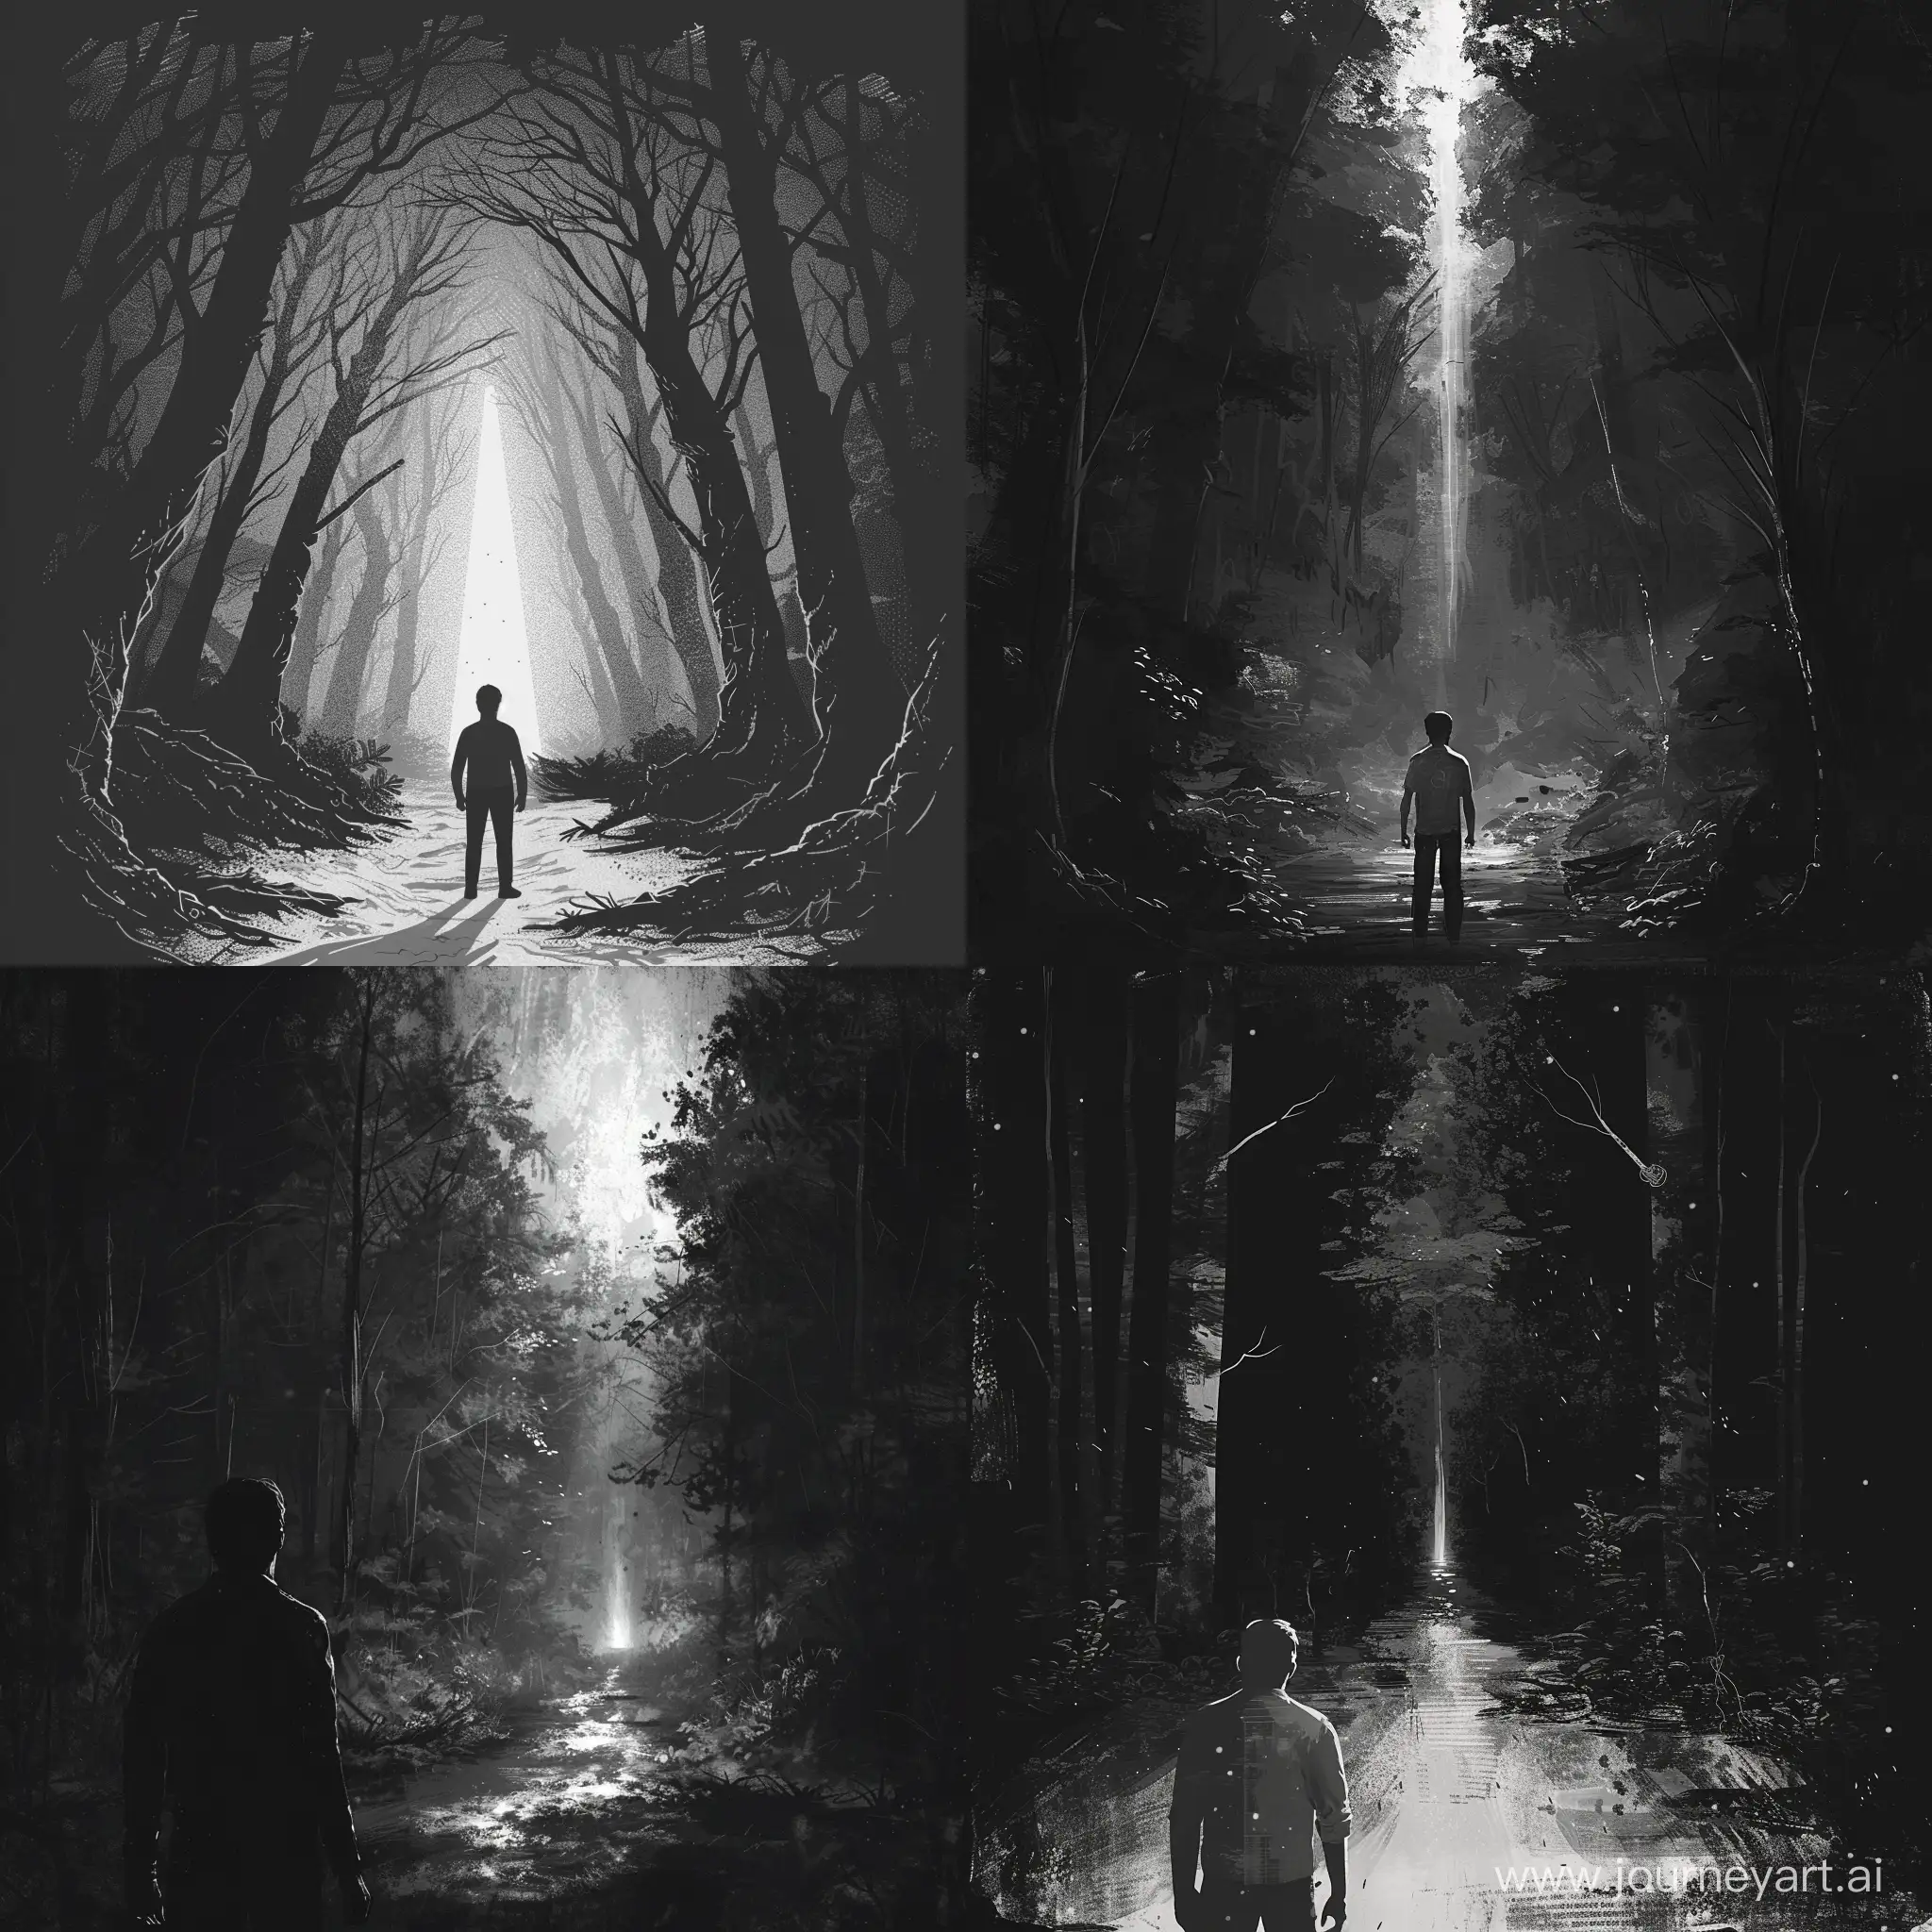 Create a black and white visual featuring a man standing in the middle of a forest, looking around. At the end of the path, there should be a faint beam of light. The atmosphere of the design should be dark and mysterious, captivating the viewers' attention.